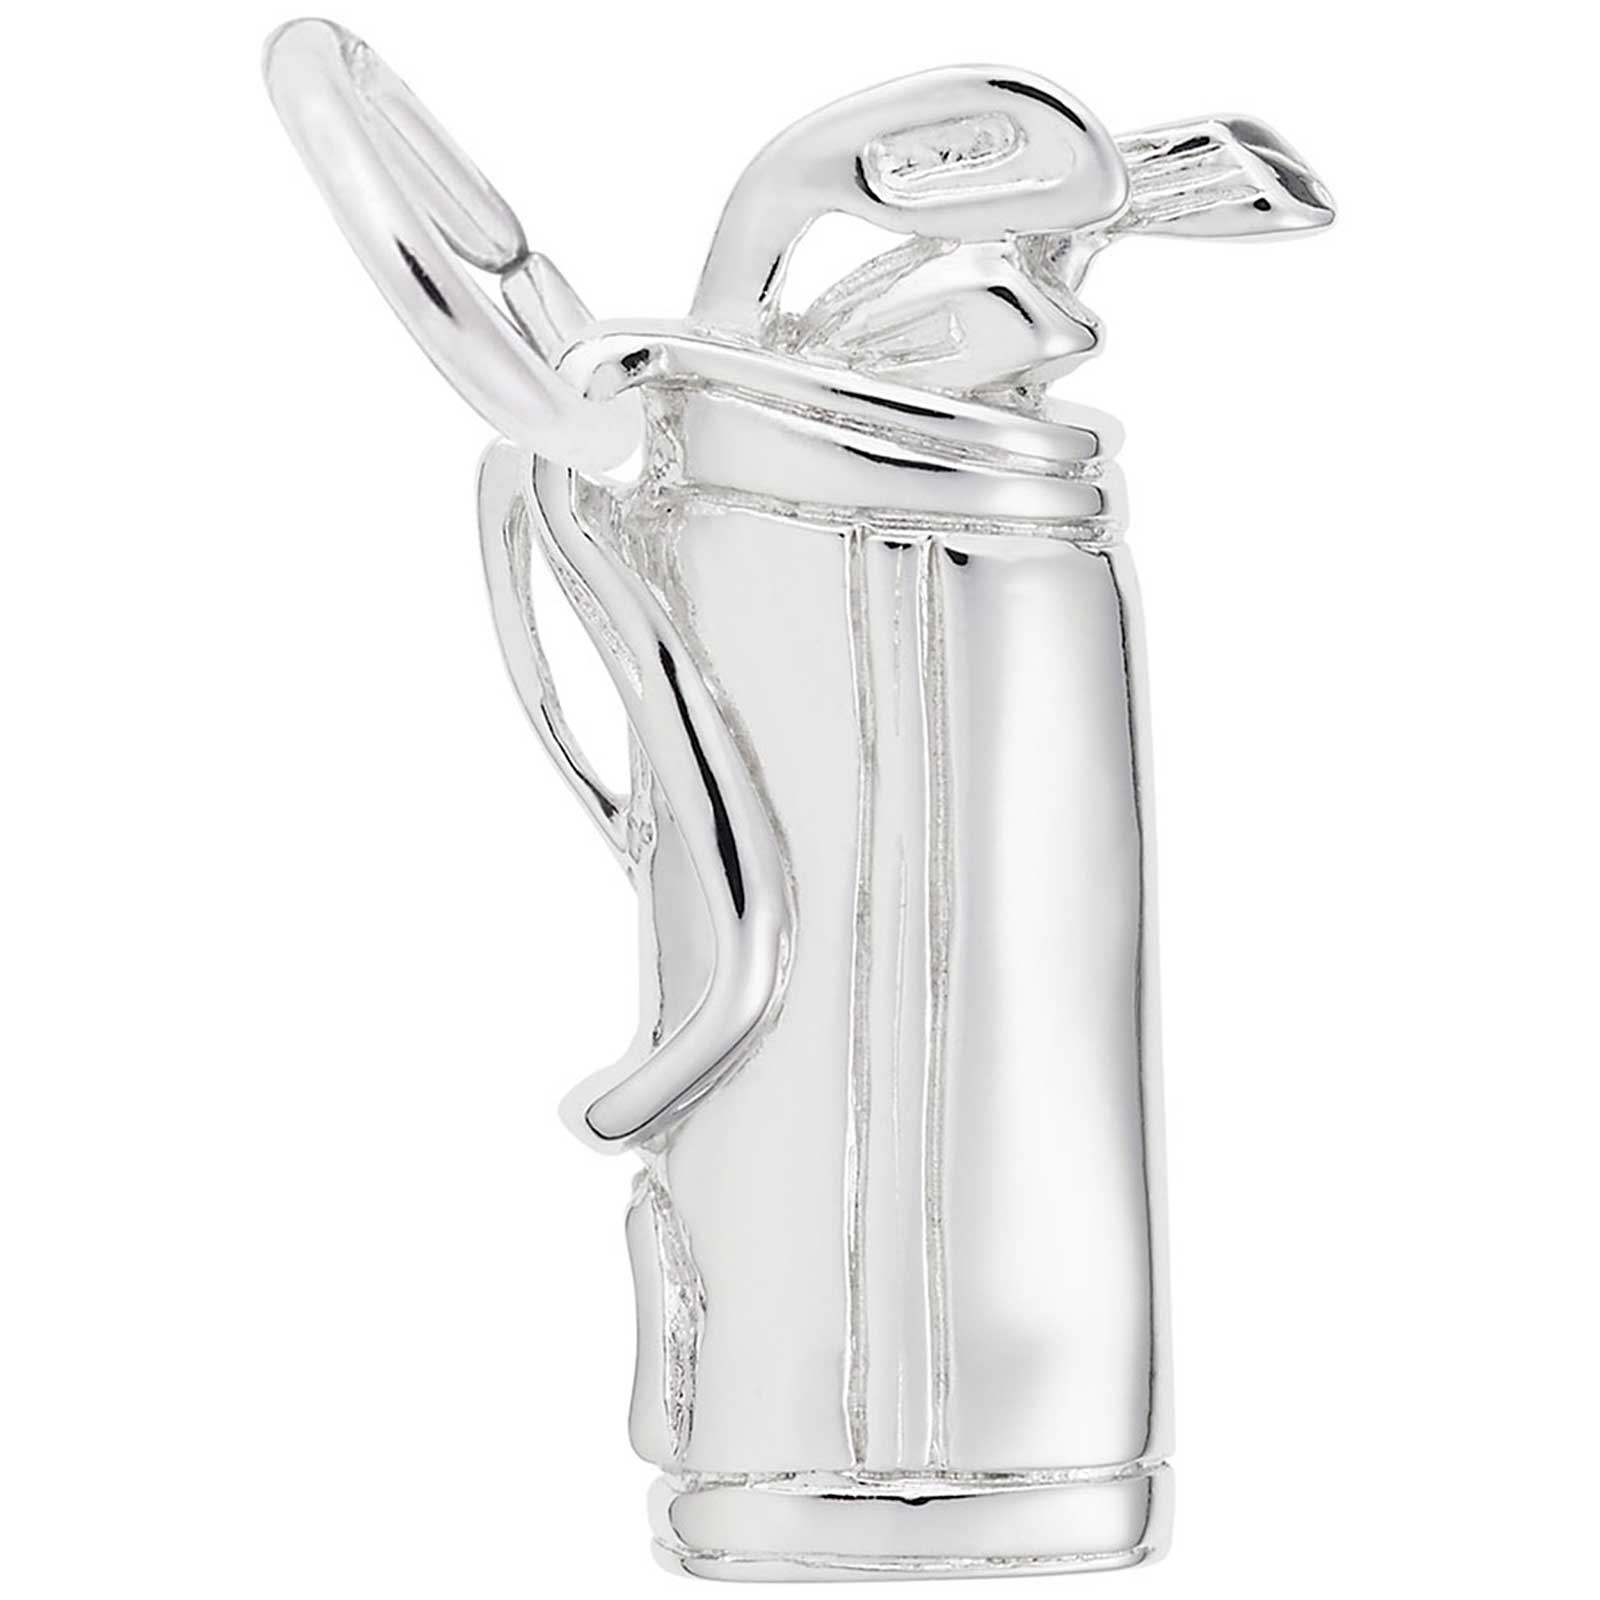 14K White Gold Golf Bag with Clubs Charm